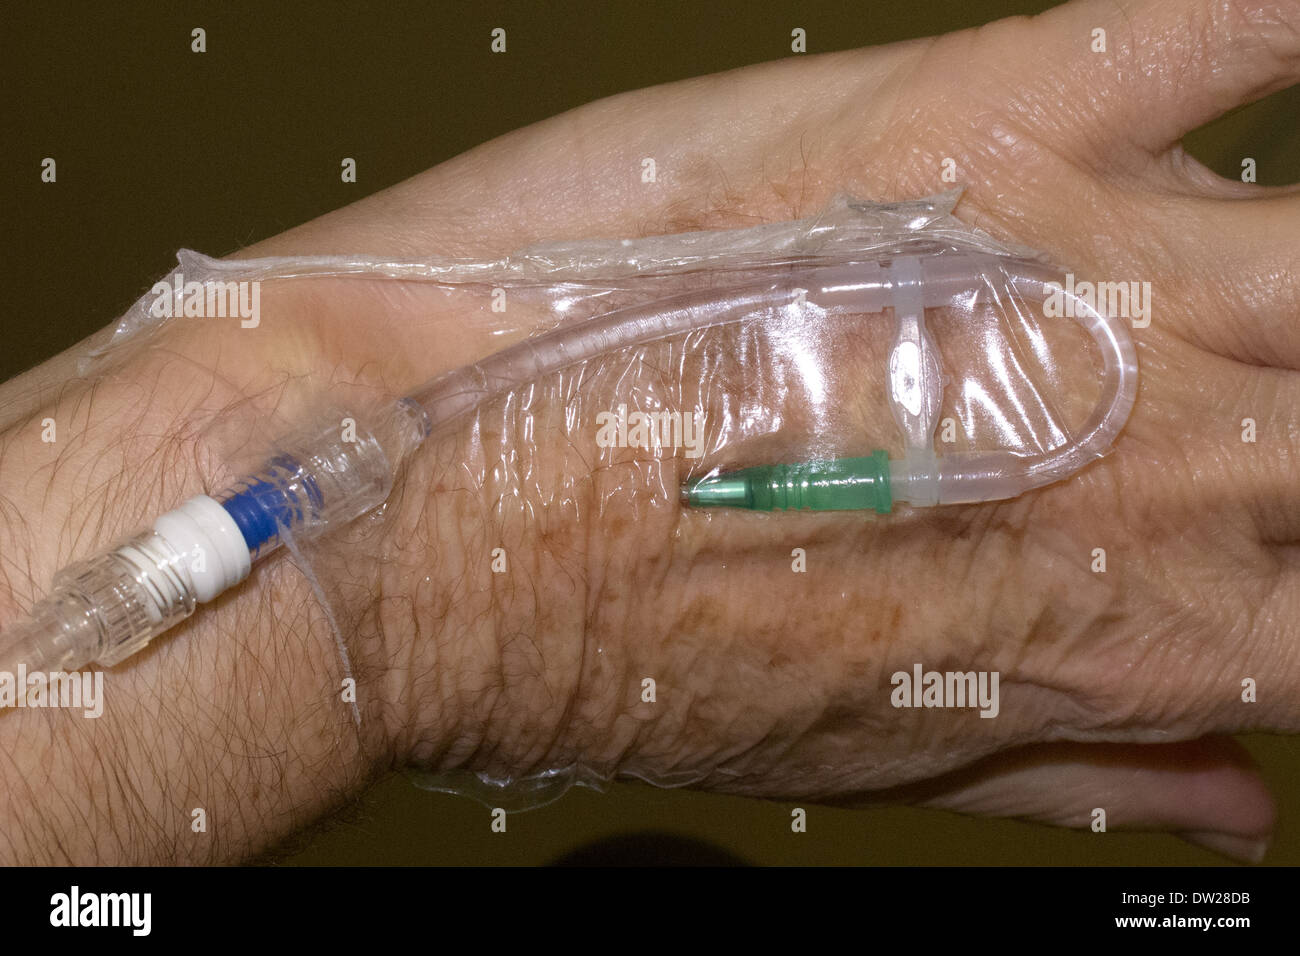 Drip in hand of patient after surgery Stock Photo